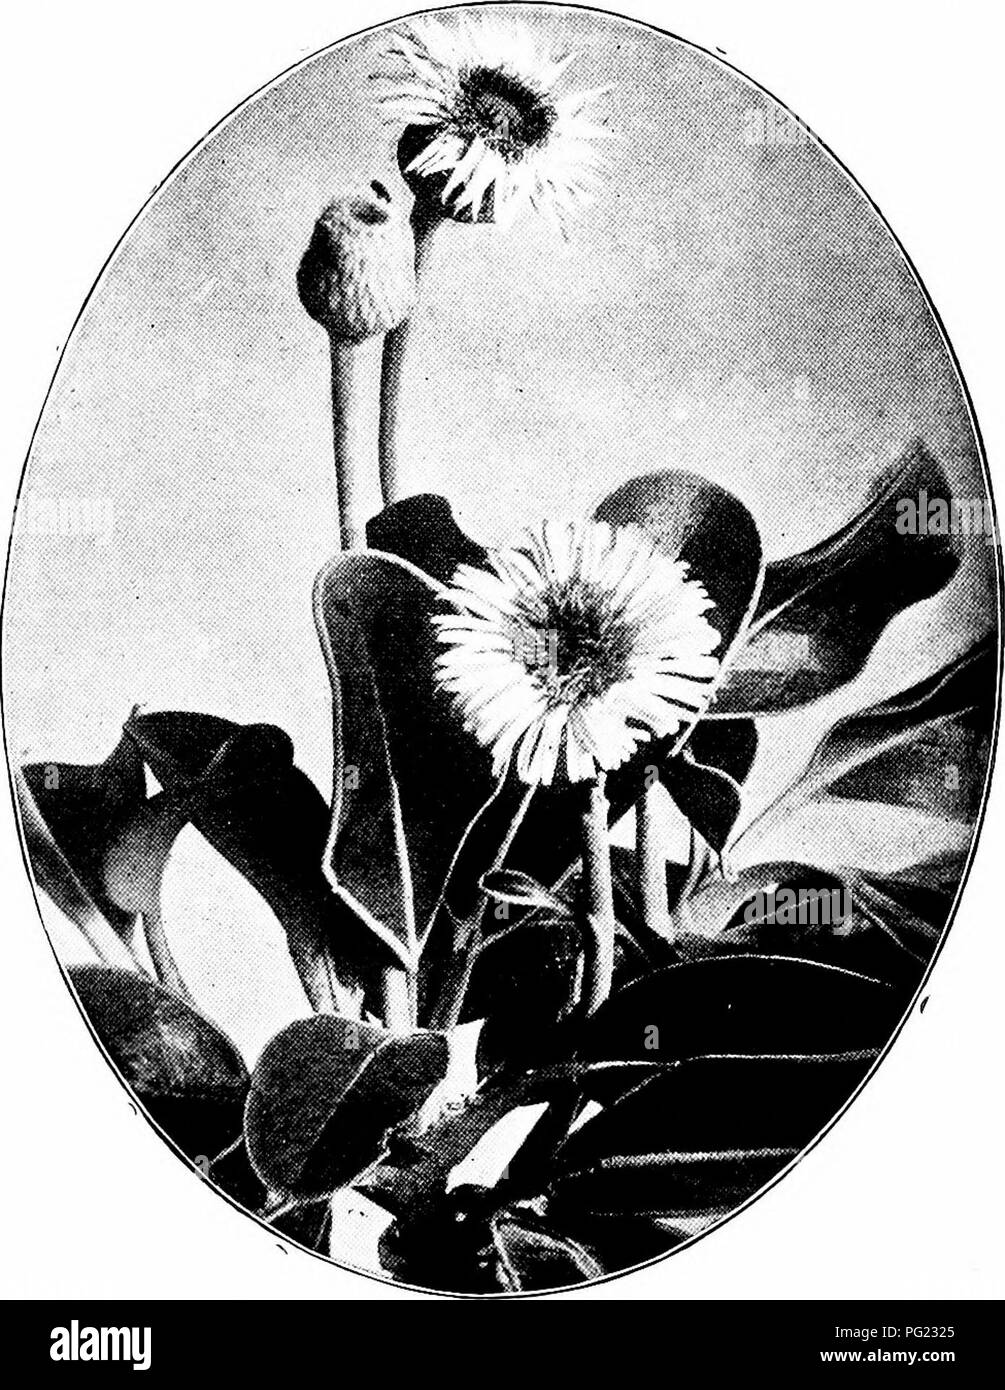 . Plants of New Zealand . Botany. DAISY, DANDELION, AND THISTLE FAMILY 407 fail of insect pollination, they frequently curl back, until they touch the pollen collected on the style itself, and thus effect self-pollination. These stages may be readily followed in the. Fig. 137. Olearia insigais (i nat. size). dandelion. (c/. also Campanulaceae, p. 403). After pollina- tion, the calyx tube usually grows upwards, bearing on its summit a parachute of bristles or hairs (the pappus). In this way the well known &quot;clock&quot; of the dandelion is formed. The pappus hairs vary considerably in charac Stock Photo